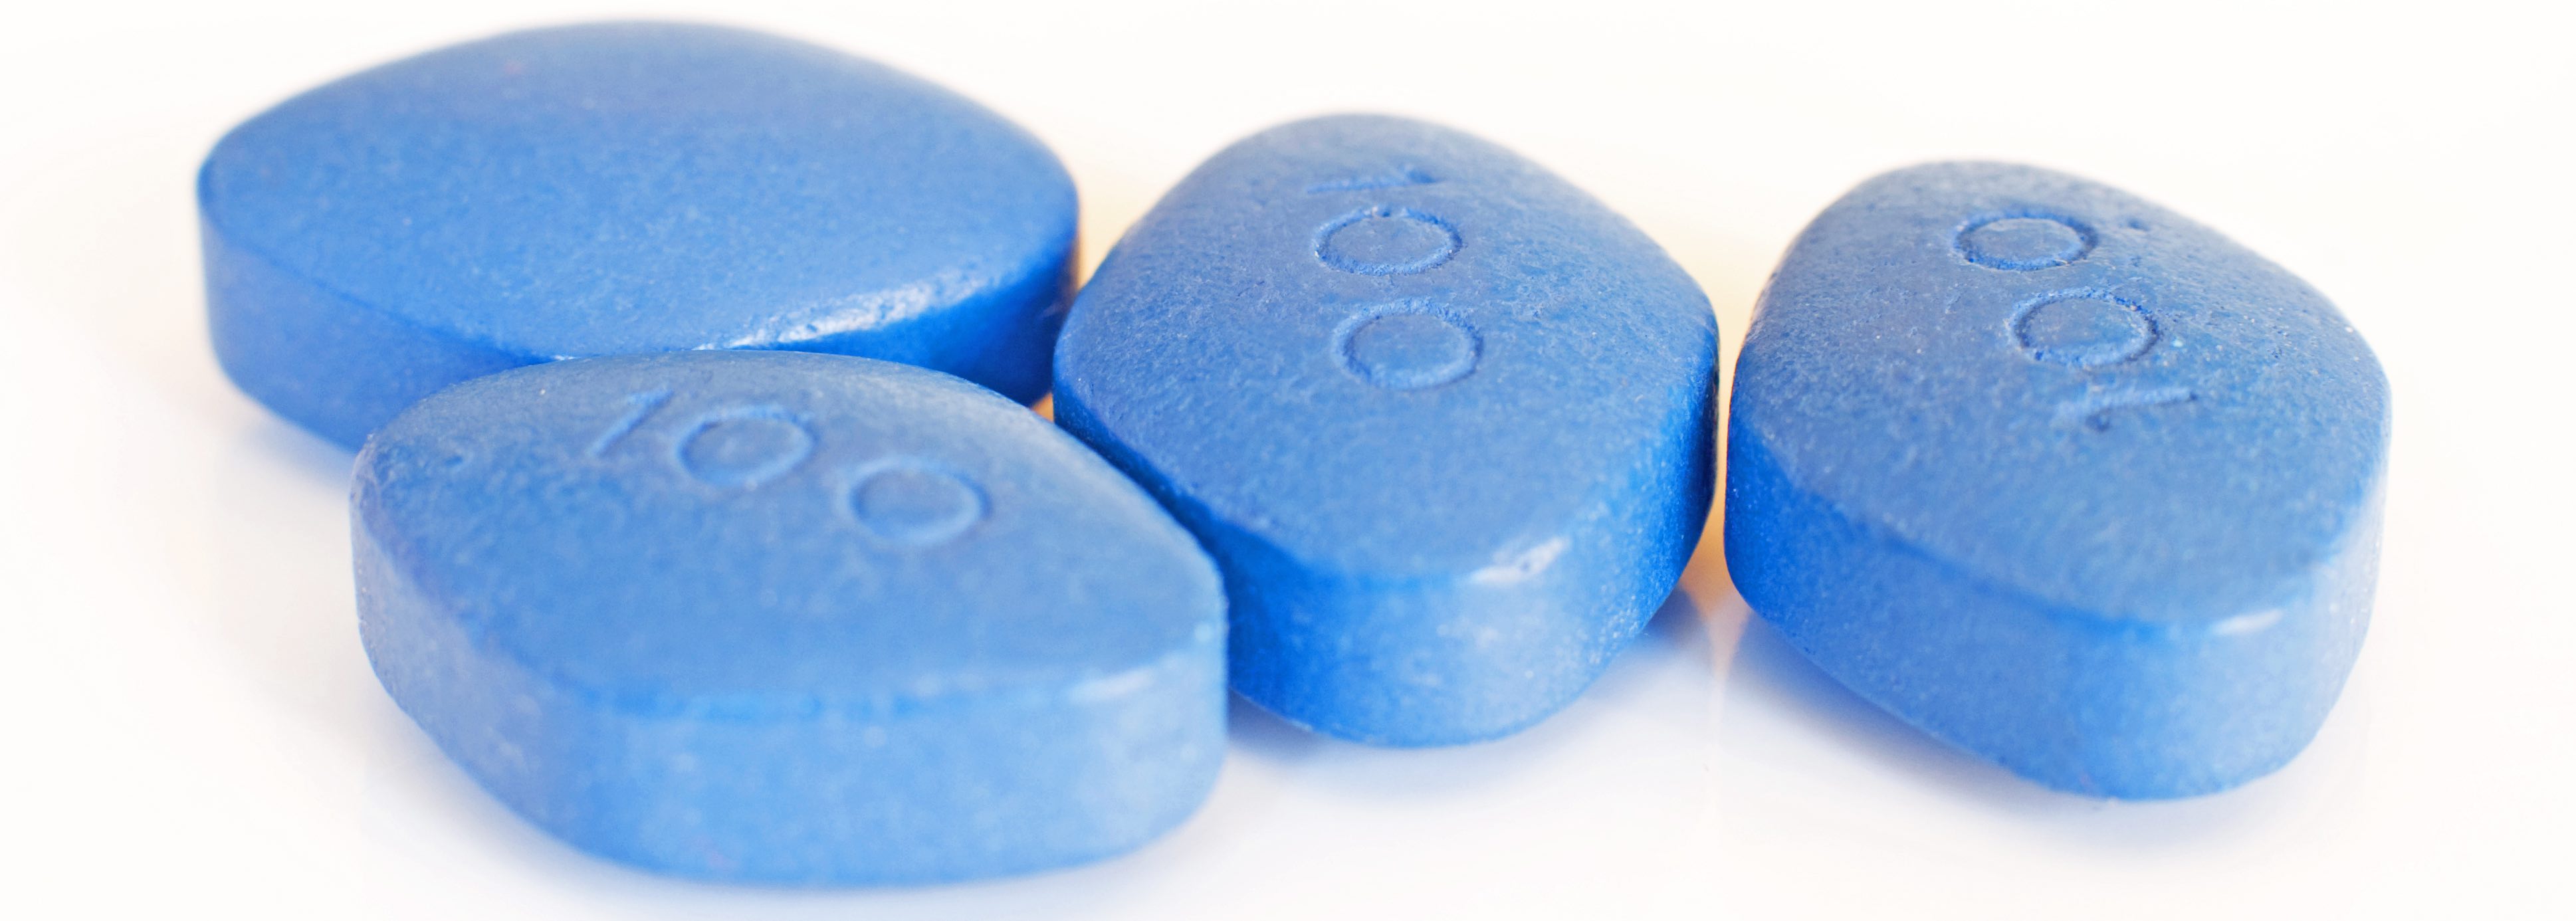 Viagra And Cialis All You Want To Know But Are Too Embarrassed To Ask